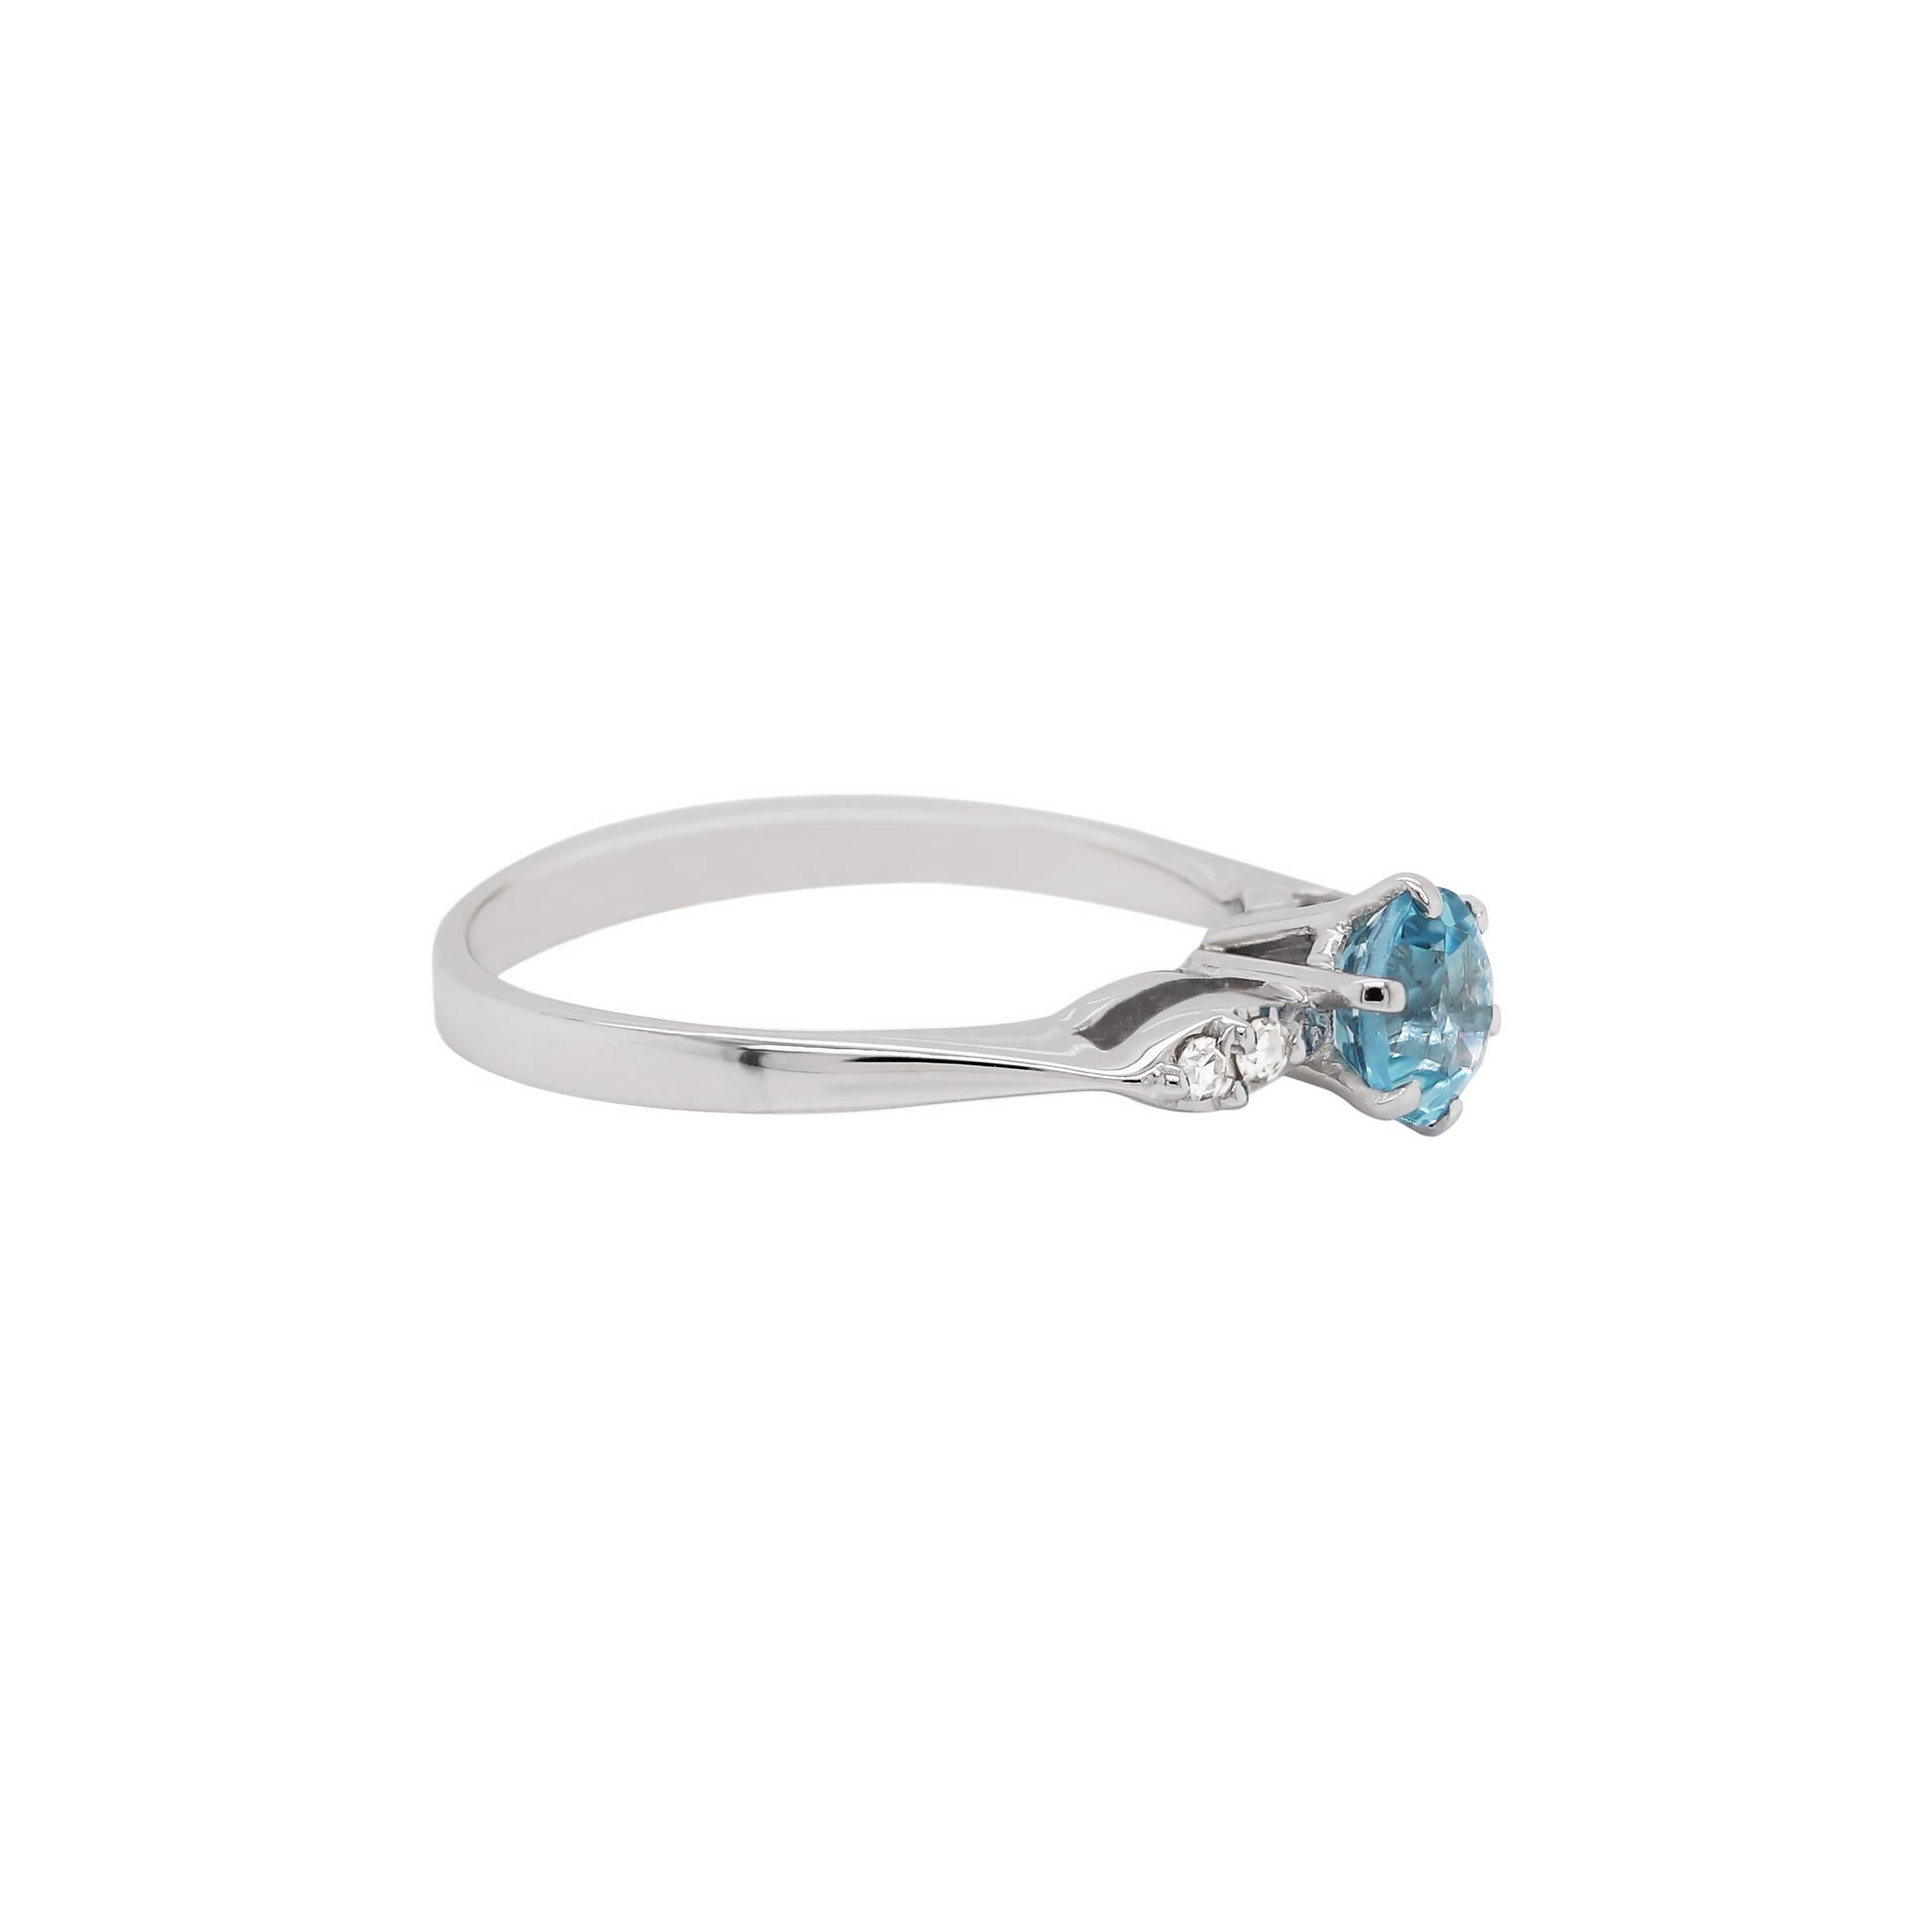 Beautiful 1970’s ring featuring a round aquamarine weighing approximately 0.50ct mounted in a six claw open back setting. The aquamarine is beautifully accompanied by a marquise shape mount on either side set with two eight cut diamonds weighing a